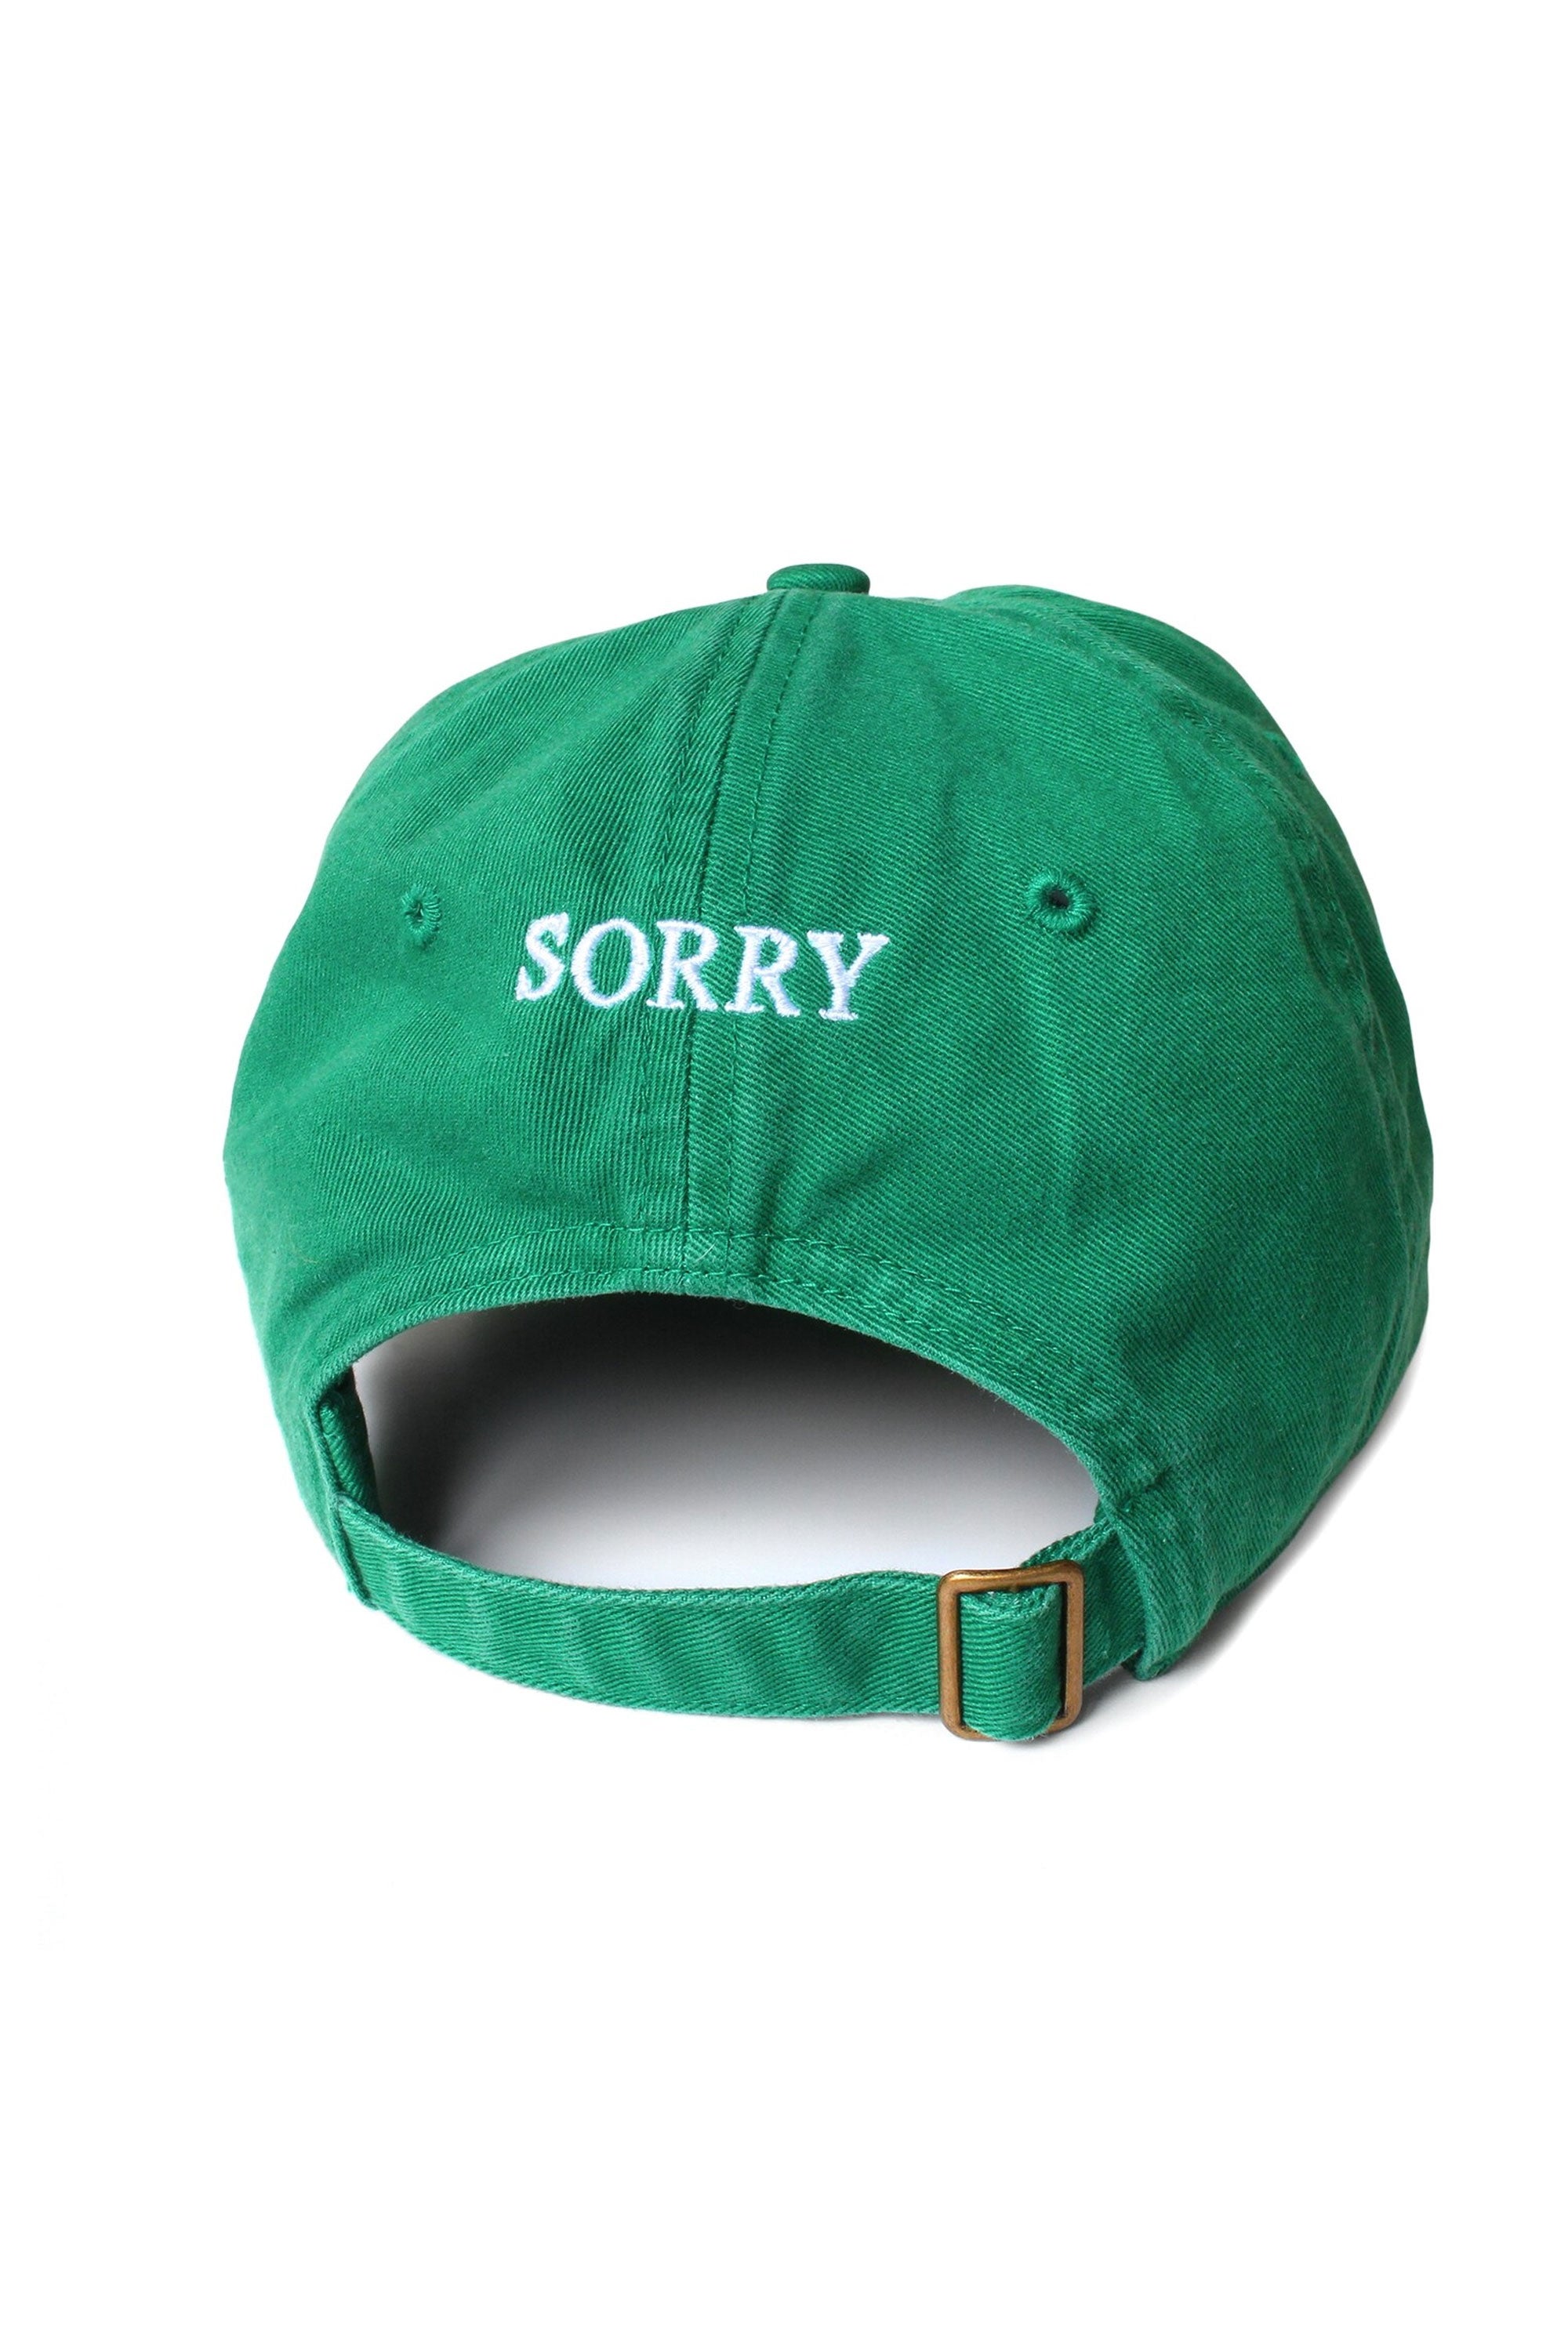 The IDEA - SORRY I DON'T WORK HERE CAP  available online with global shipping, and in PAM Stores Melbourne and Sydney.